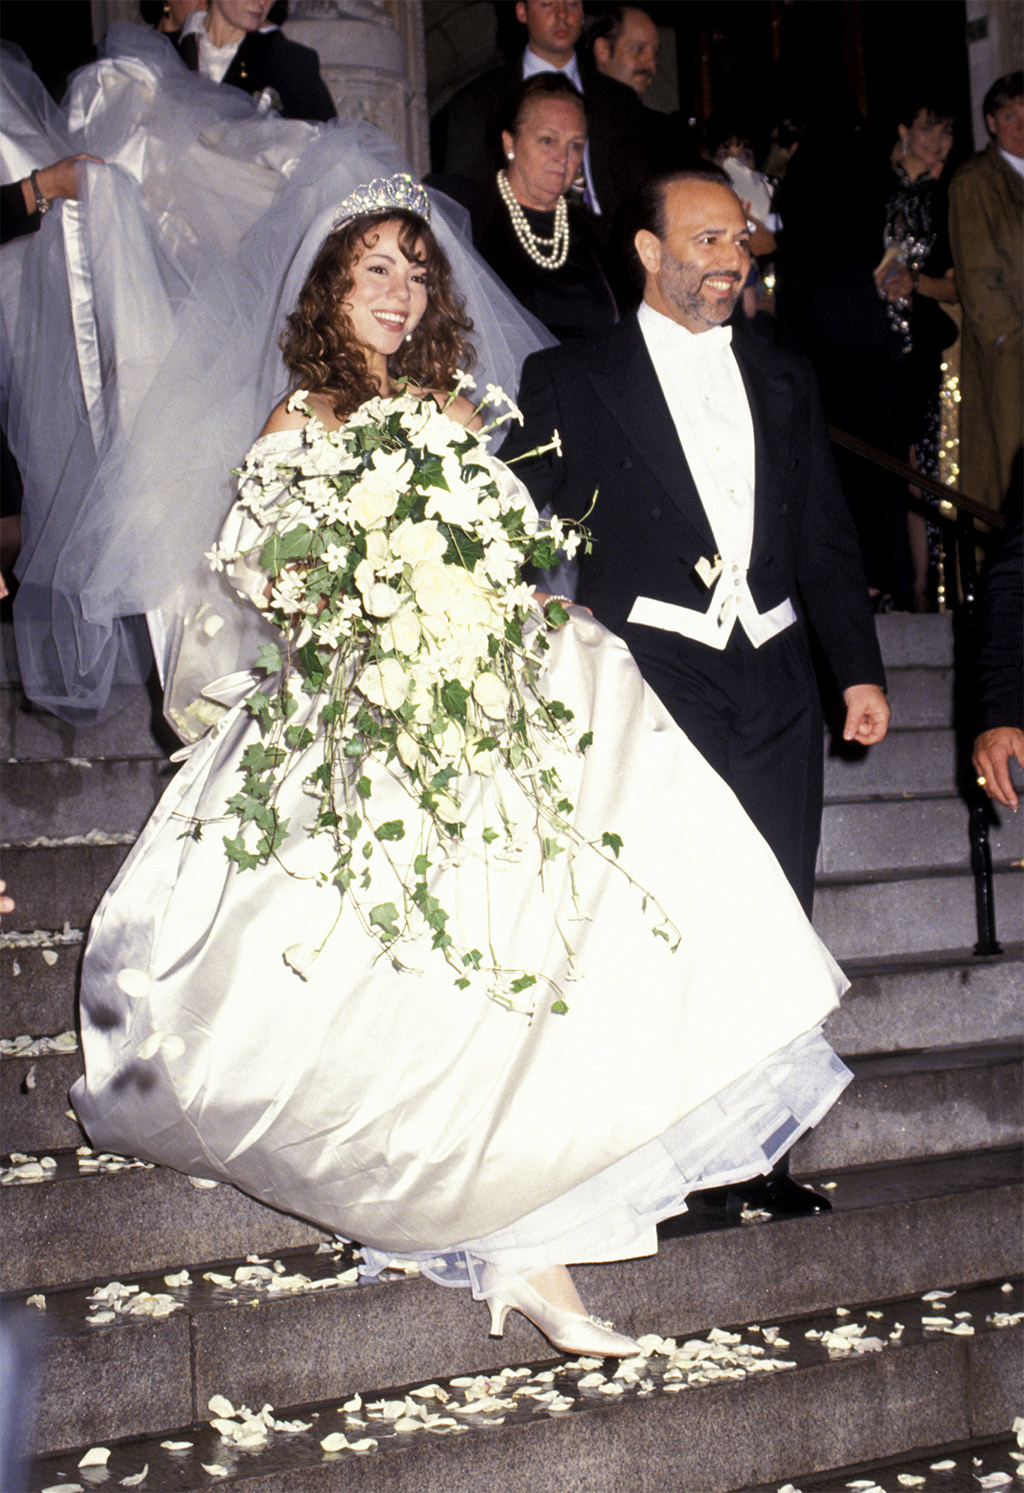 Mariah Carey and Tommy Mottola during Wedding of Mariah Carey and Tommy Mottola at St Thomas Episcopal Church/Metropolitan Club in New York City, NY, United States.